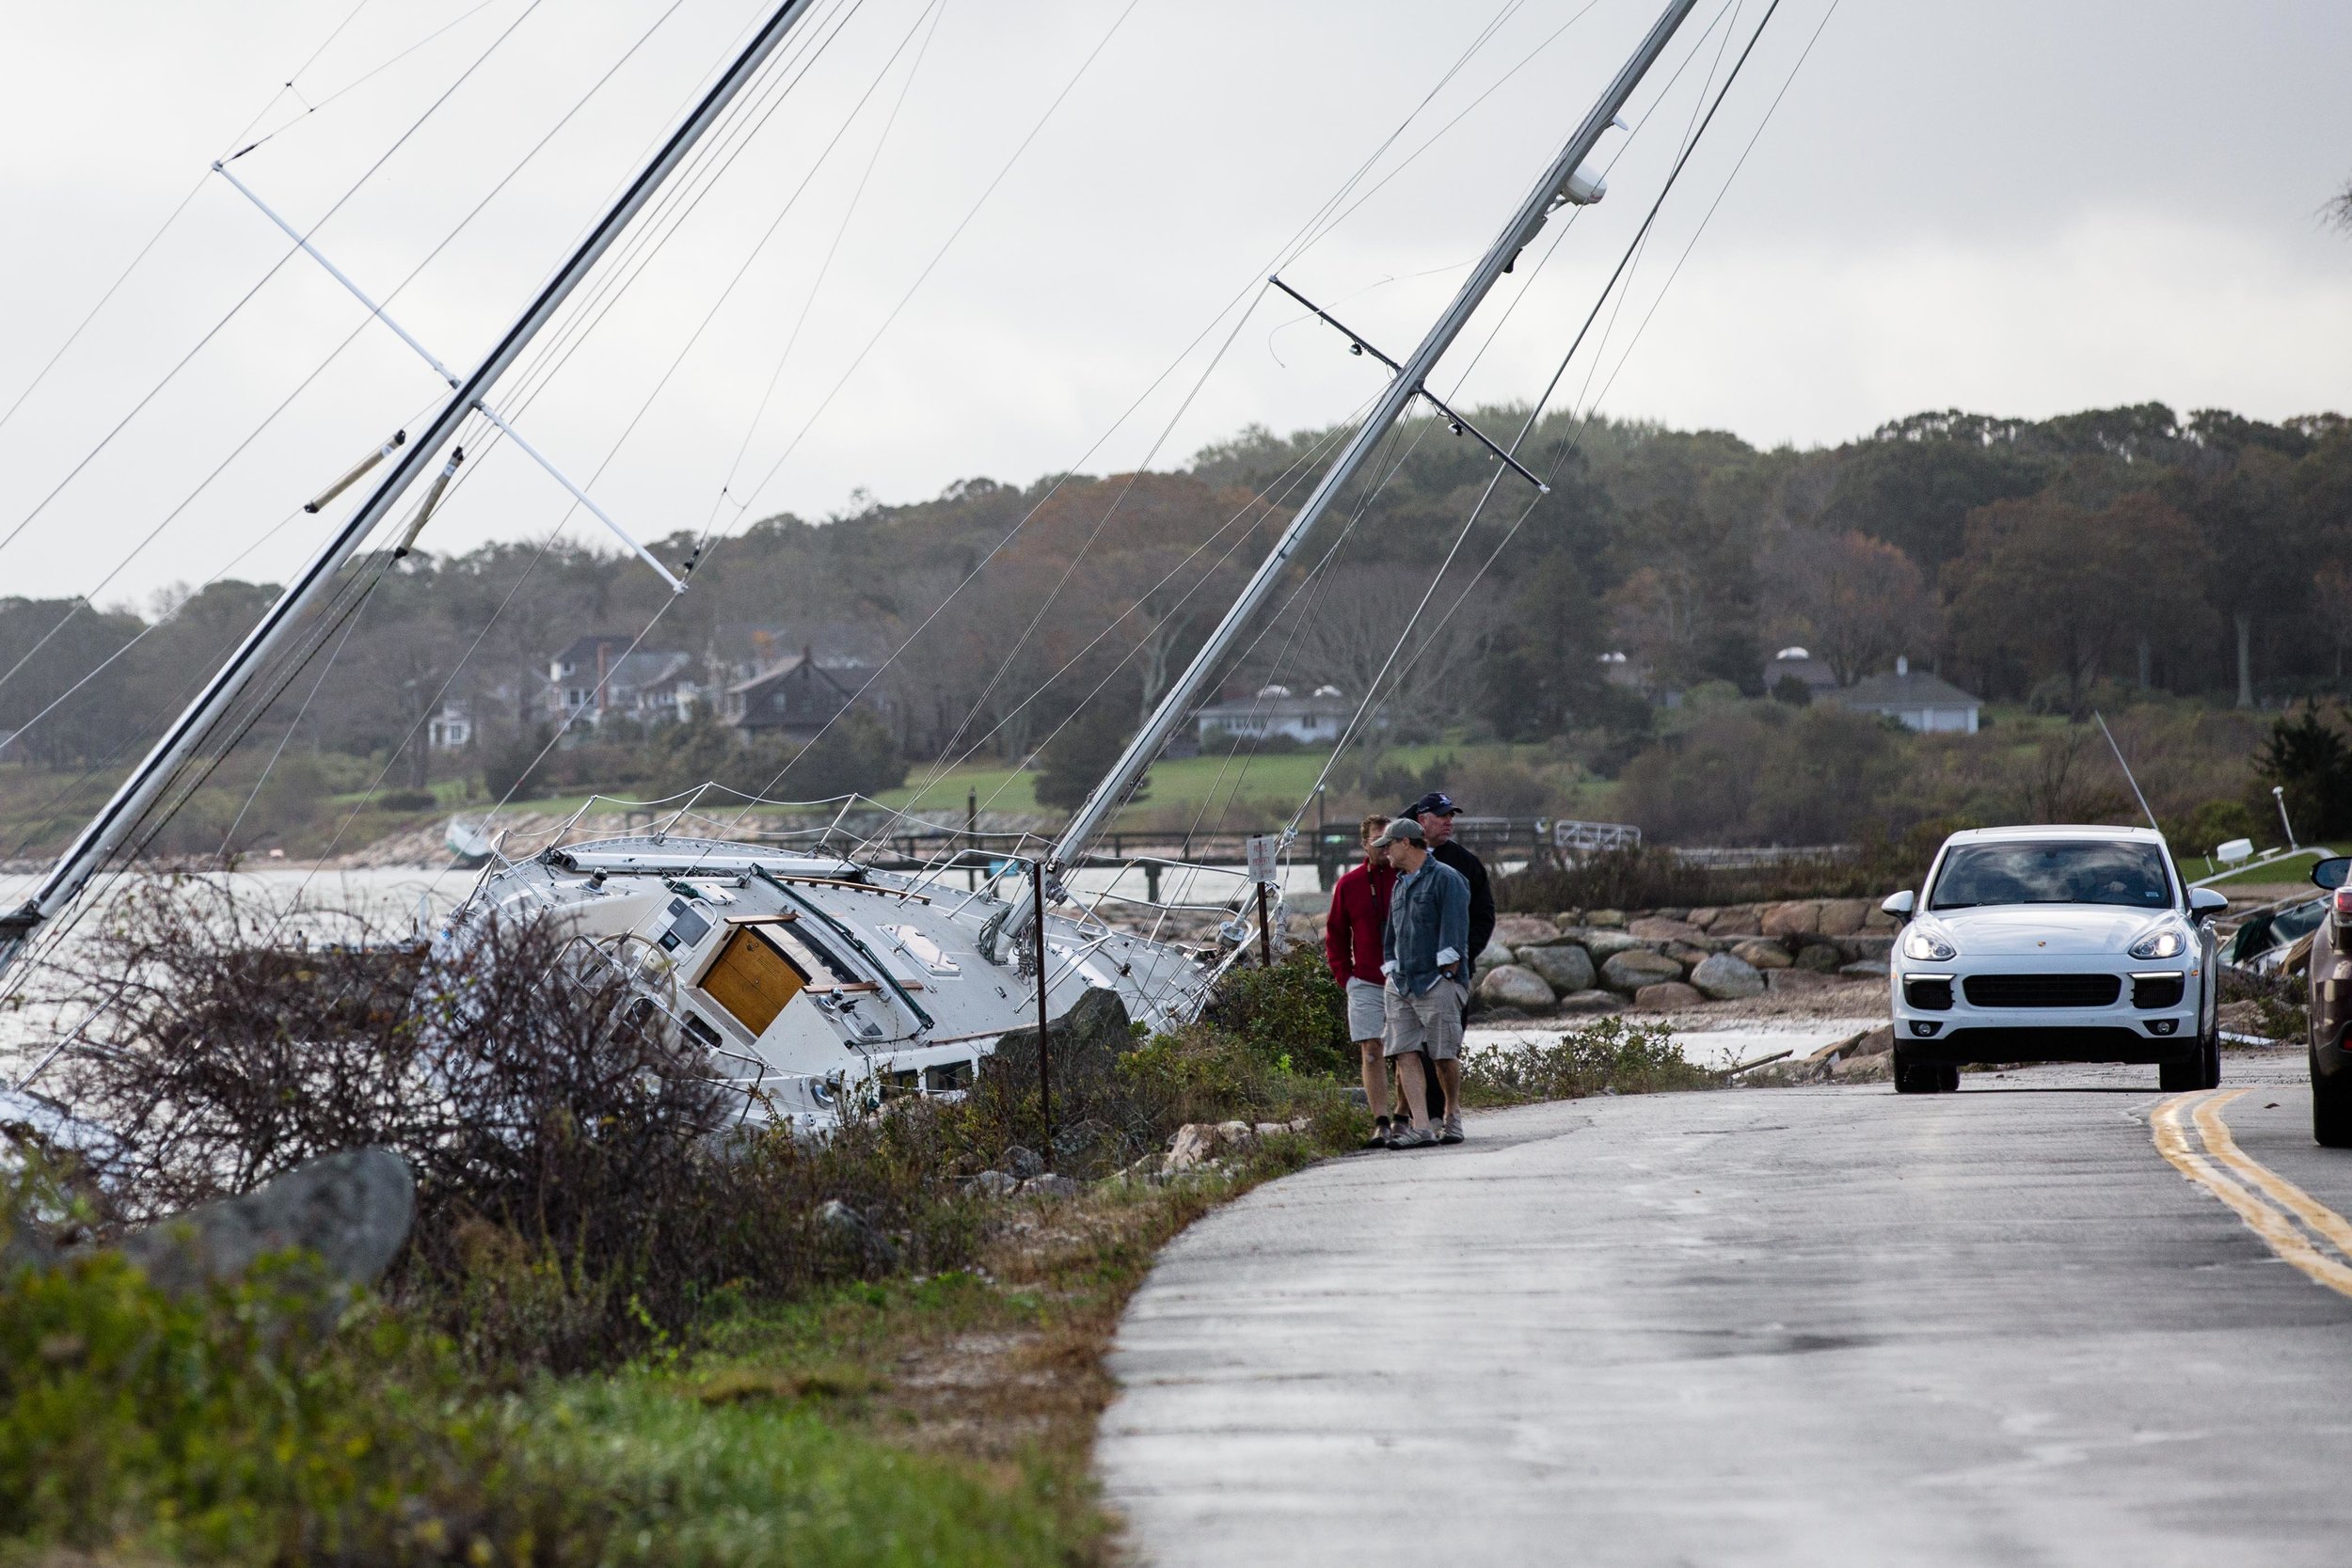  Masts can be seen hanging over Smithneck Road. 